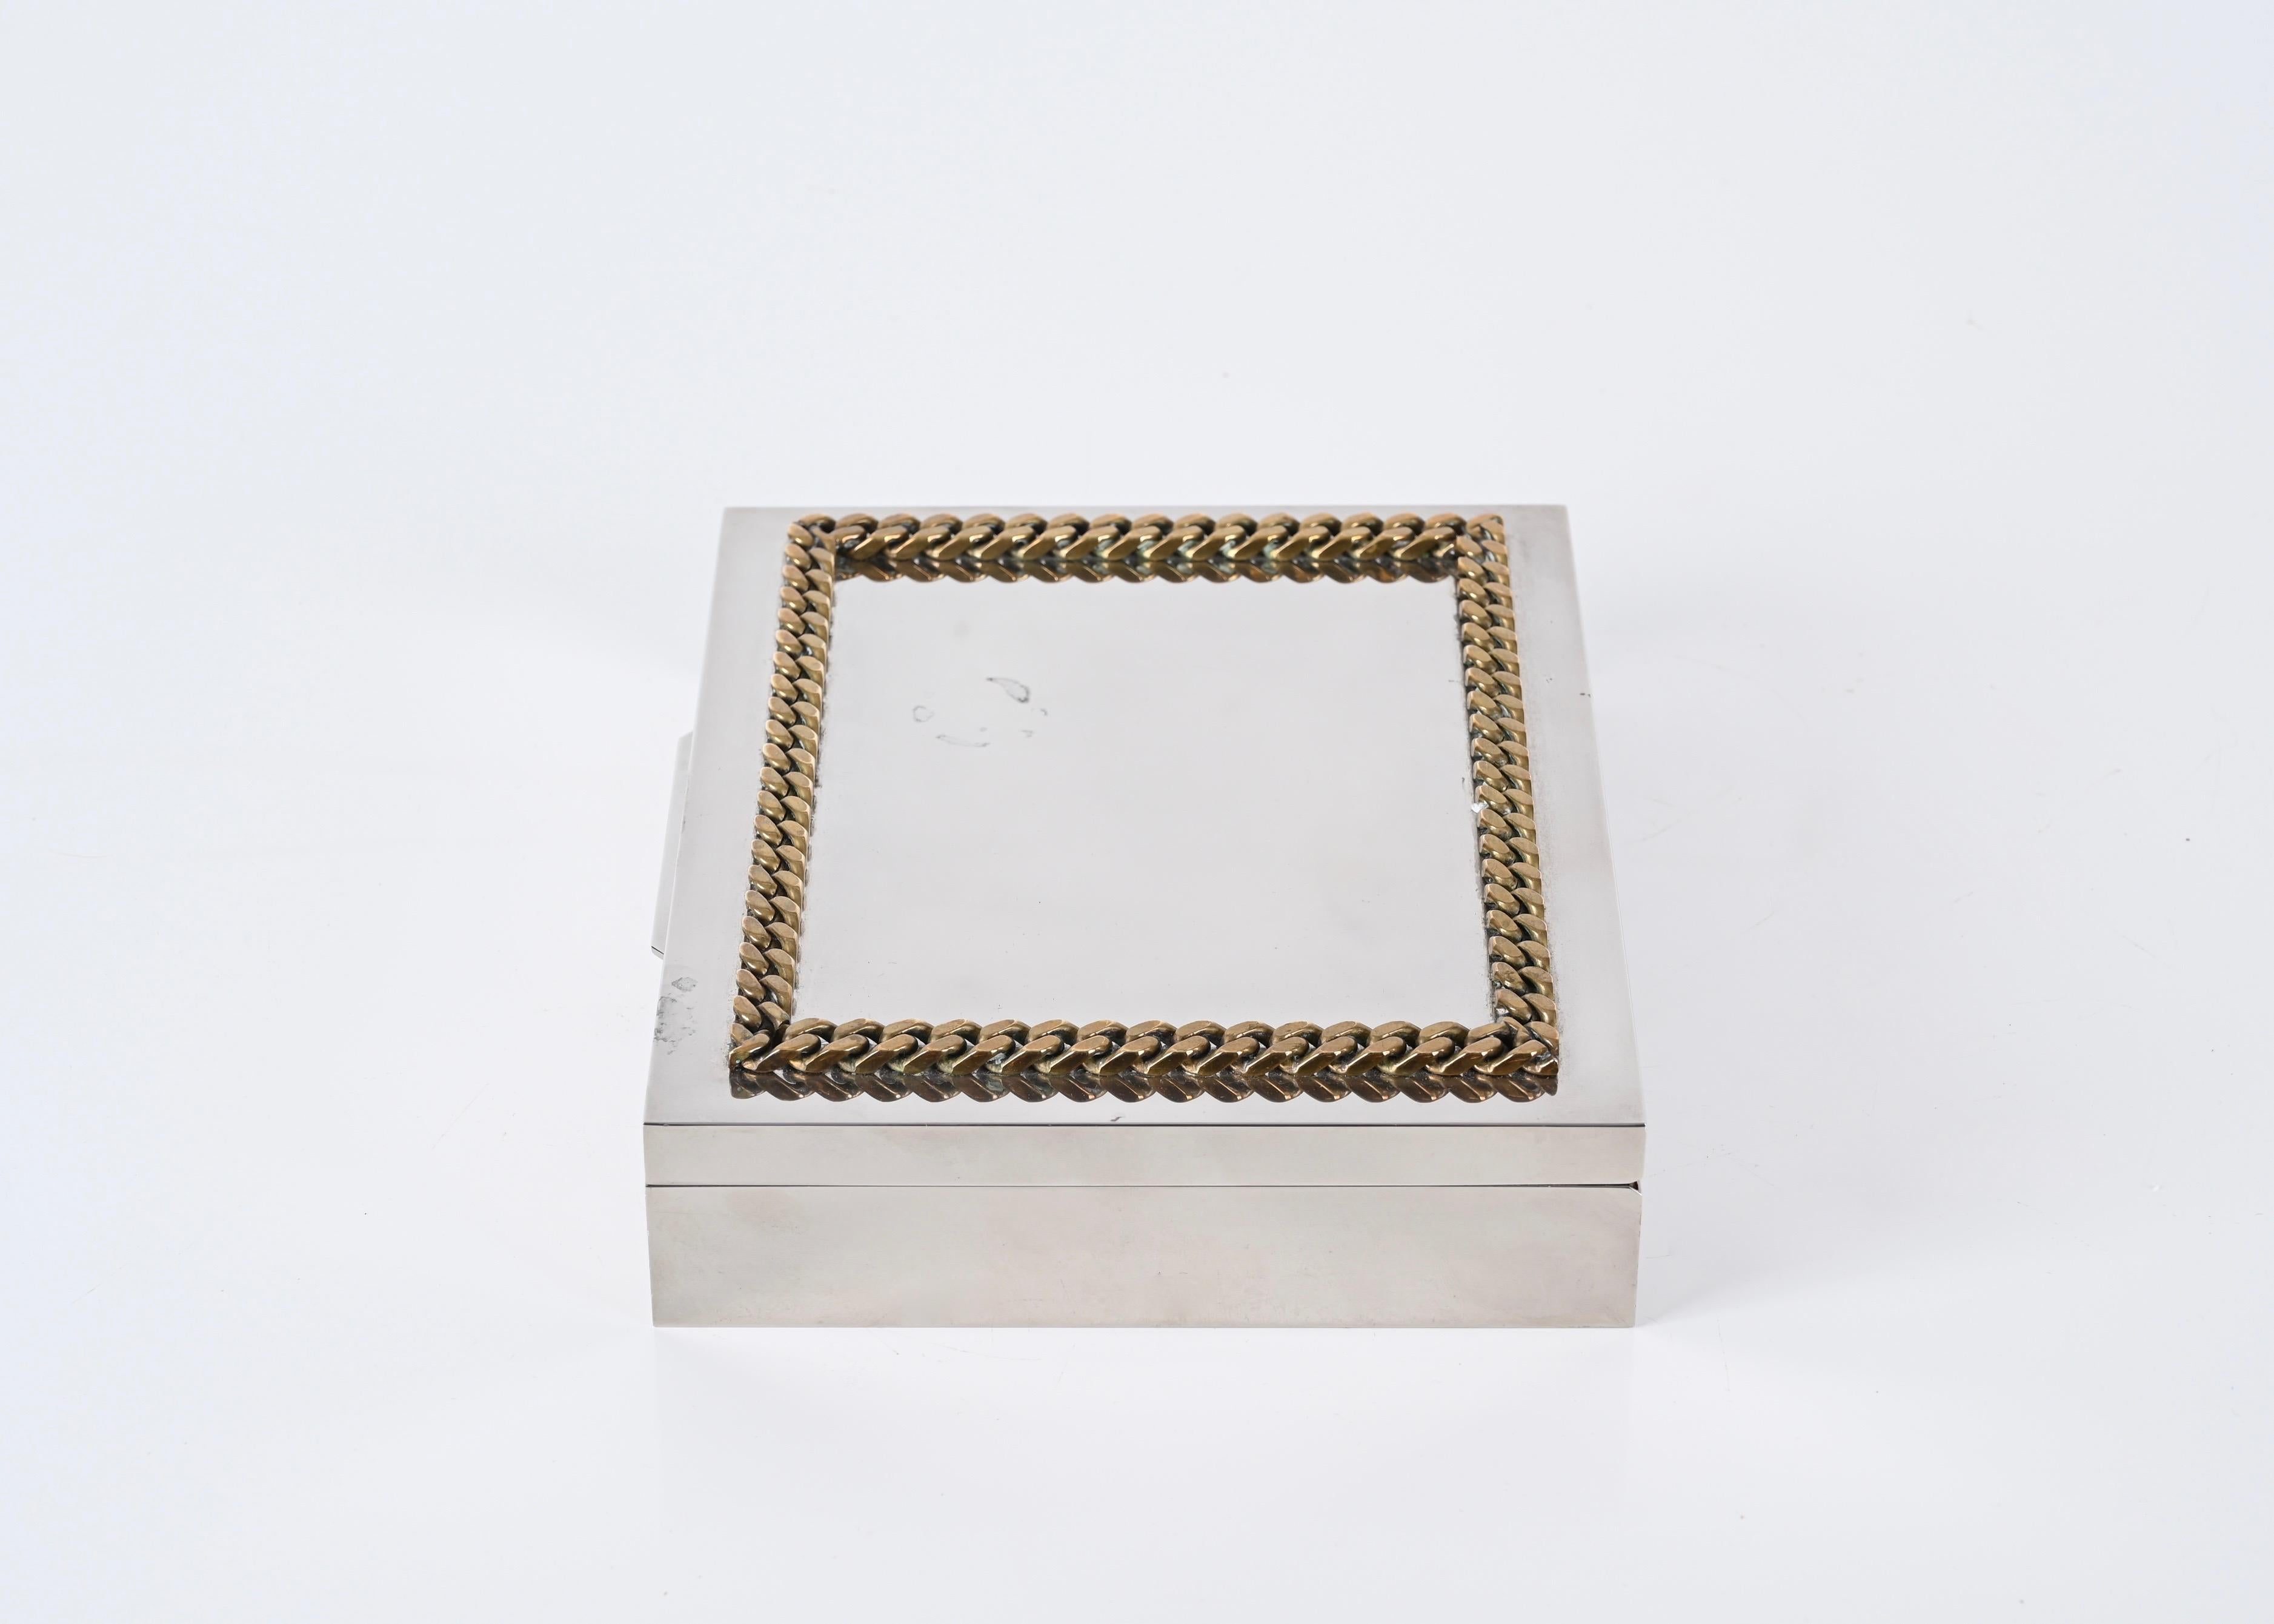 Chrome and  Braided Brass Italian Decorative Box, Gucci Style 1980s For Sale 3